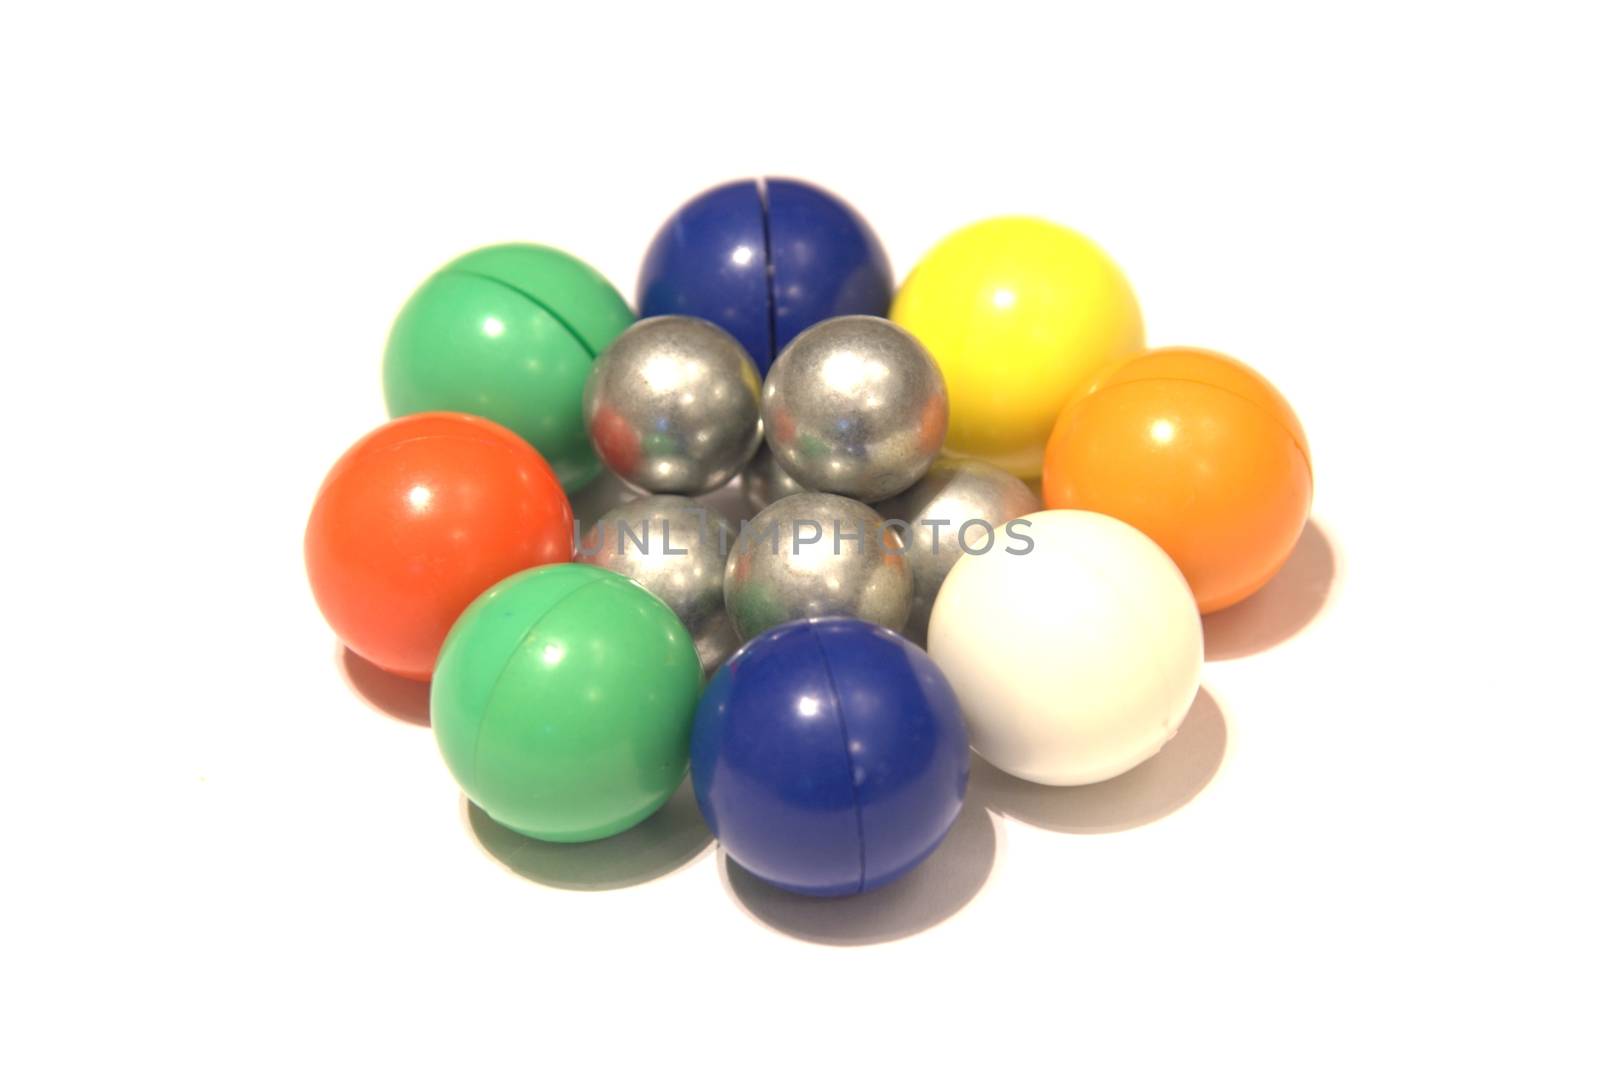 Color balls by javax